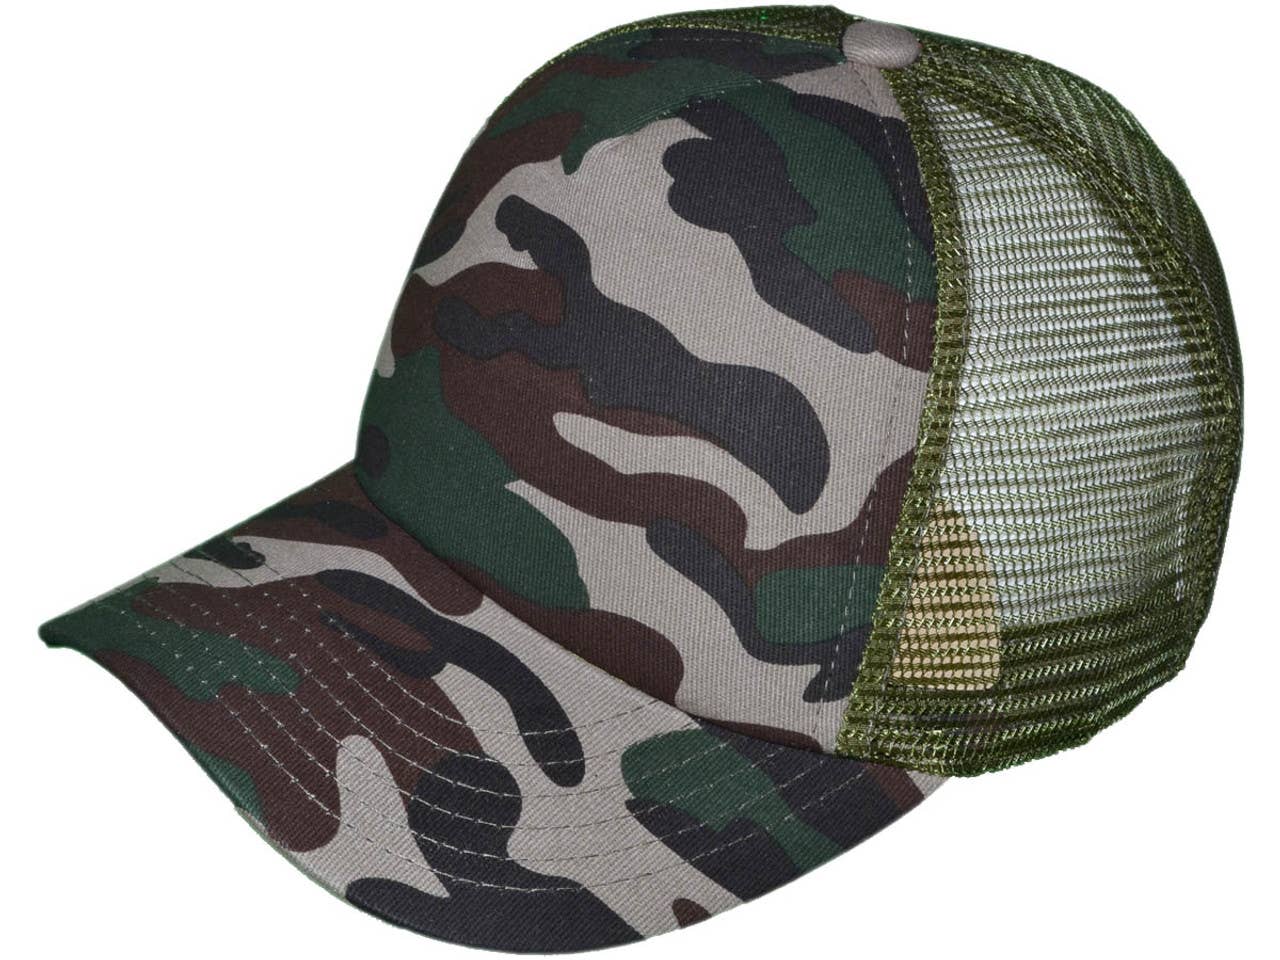 Dirty Hippy Hat (Multi Color Options)